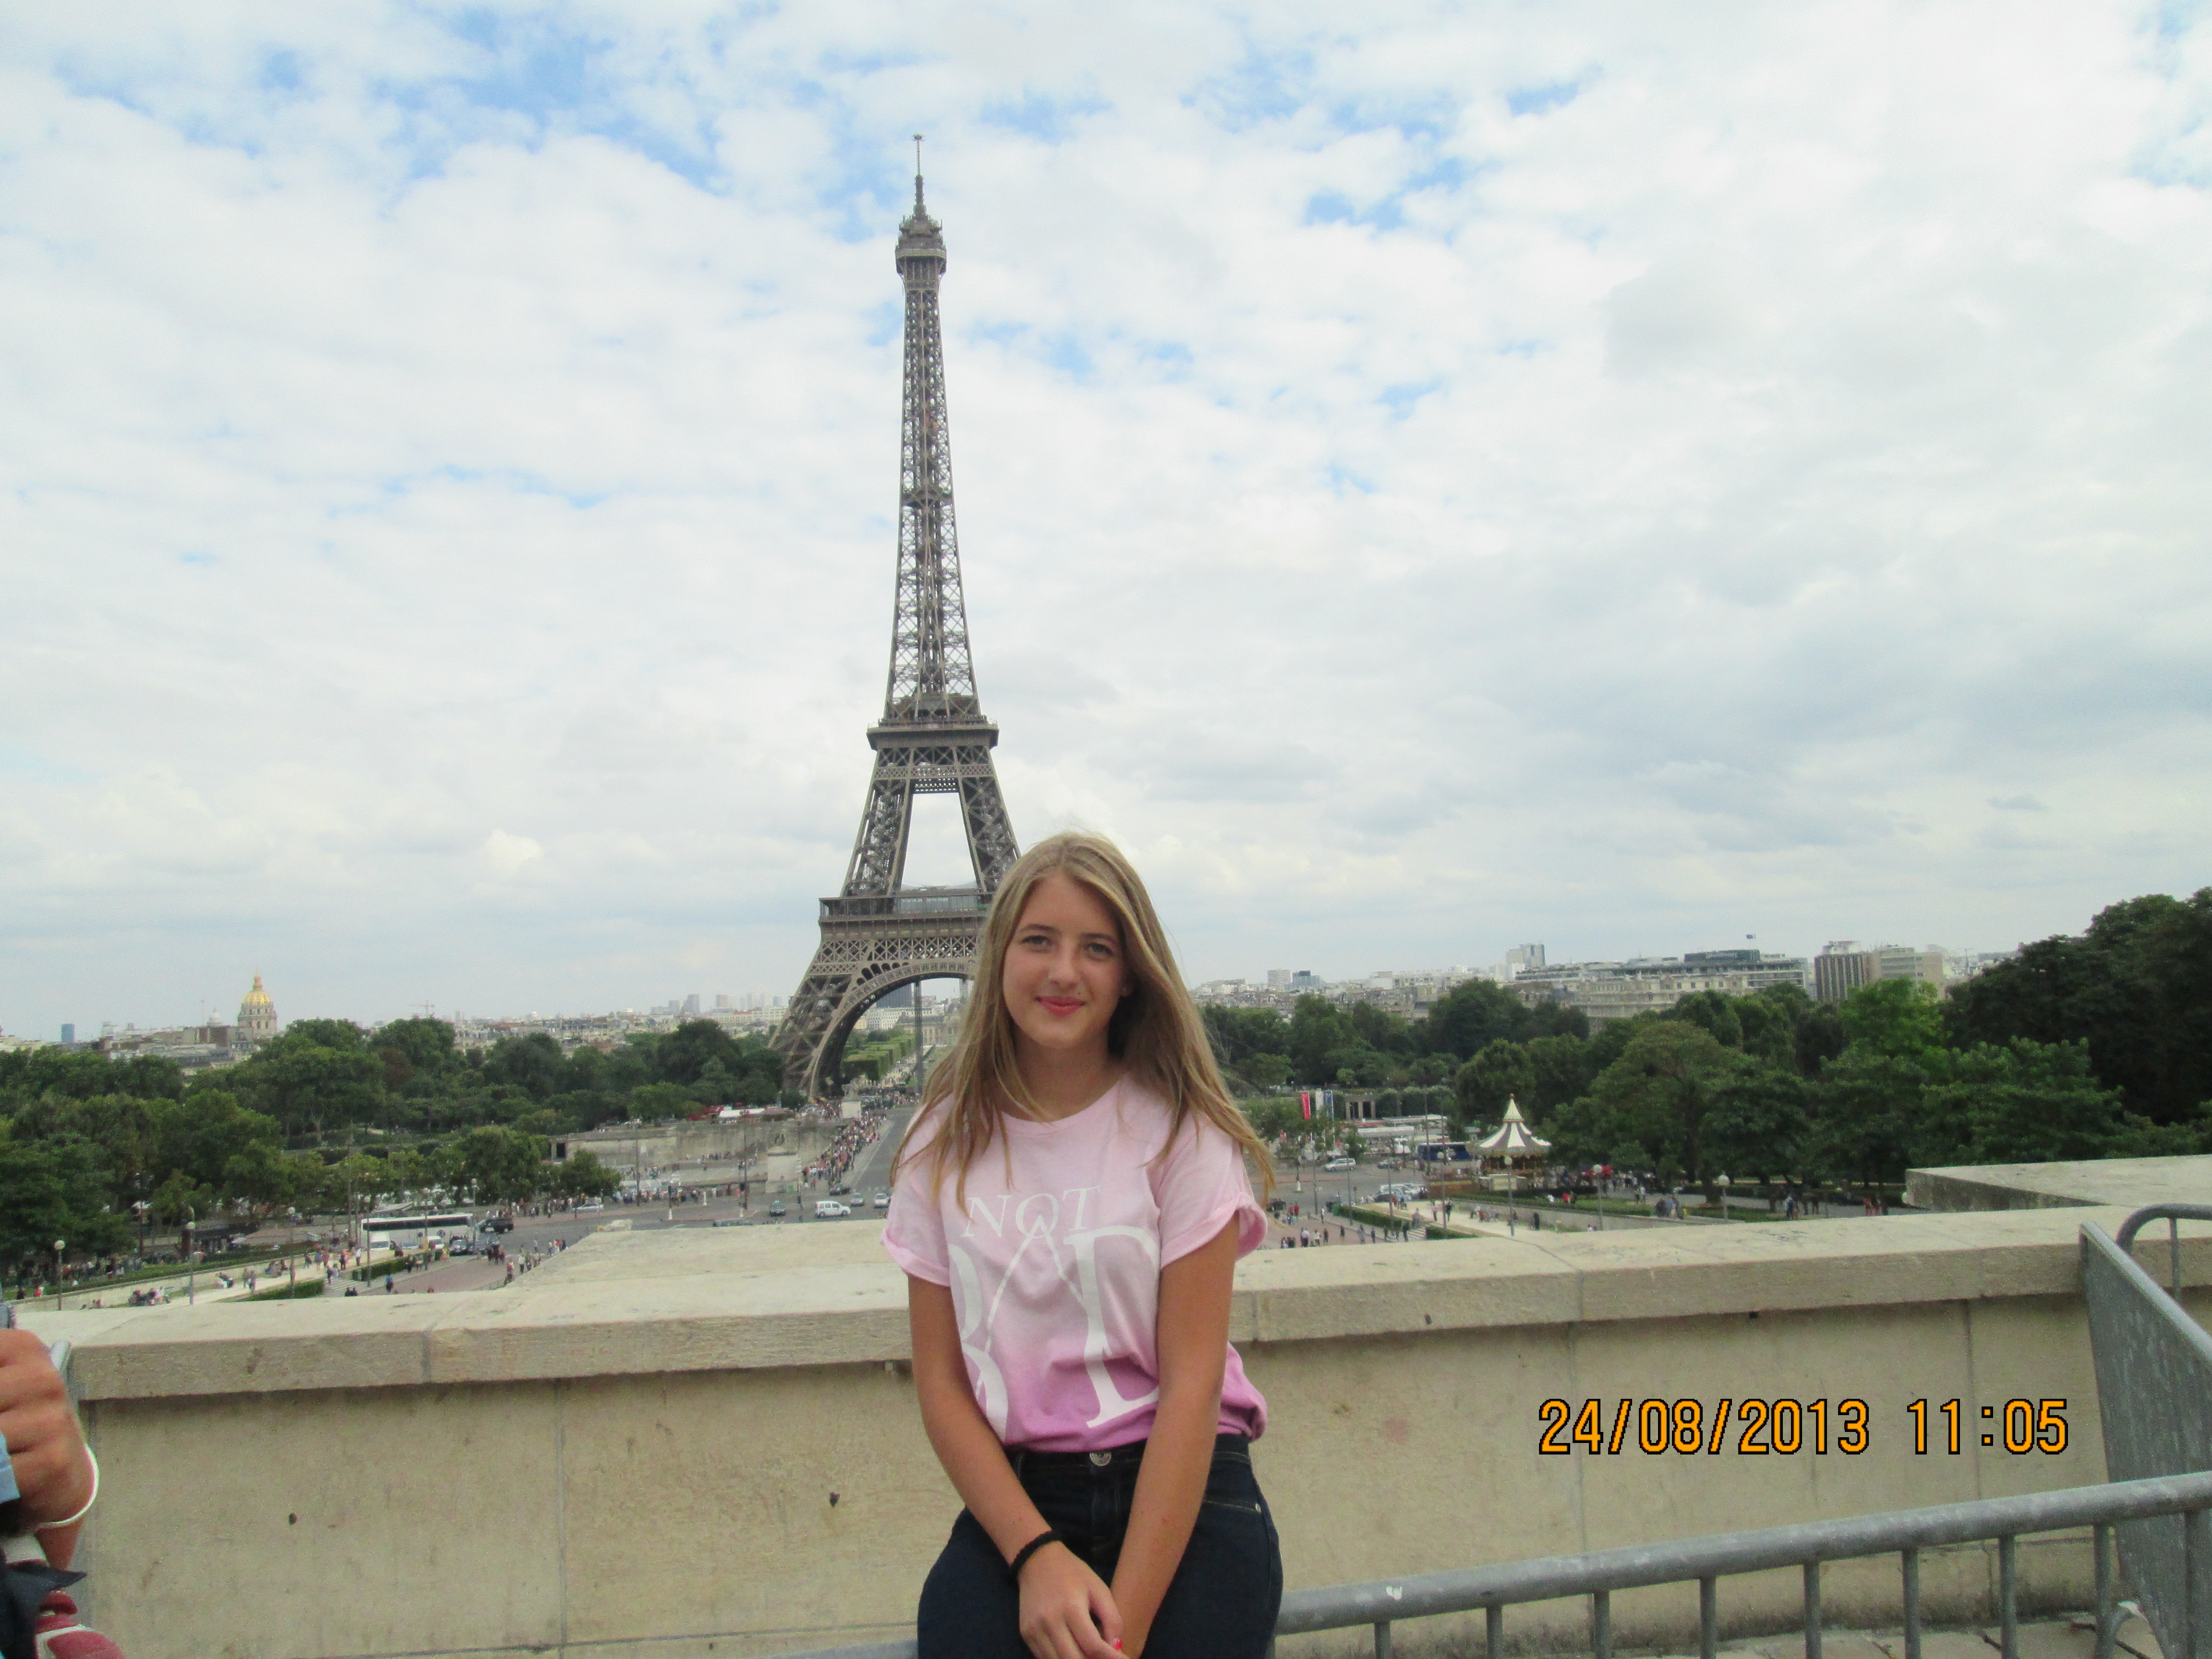 This image is an image of me in front of the Eiffel Tower